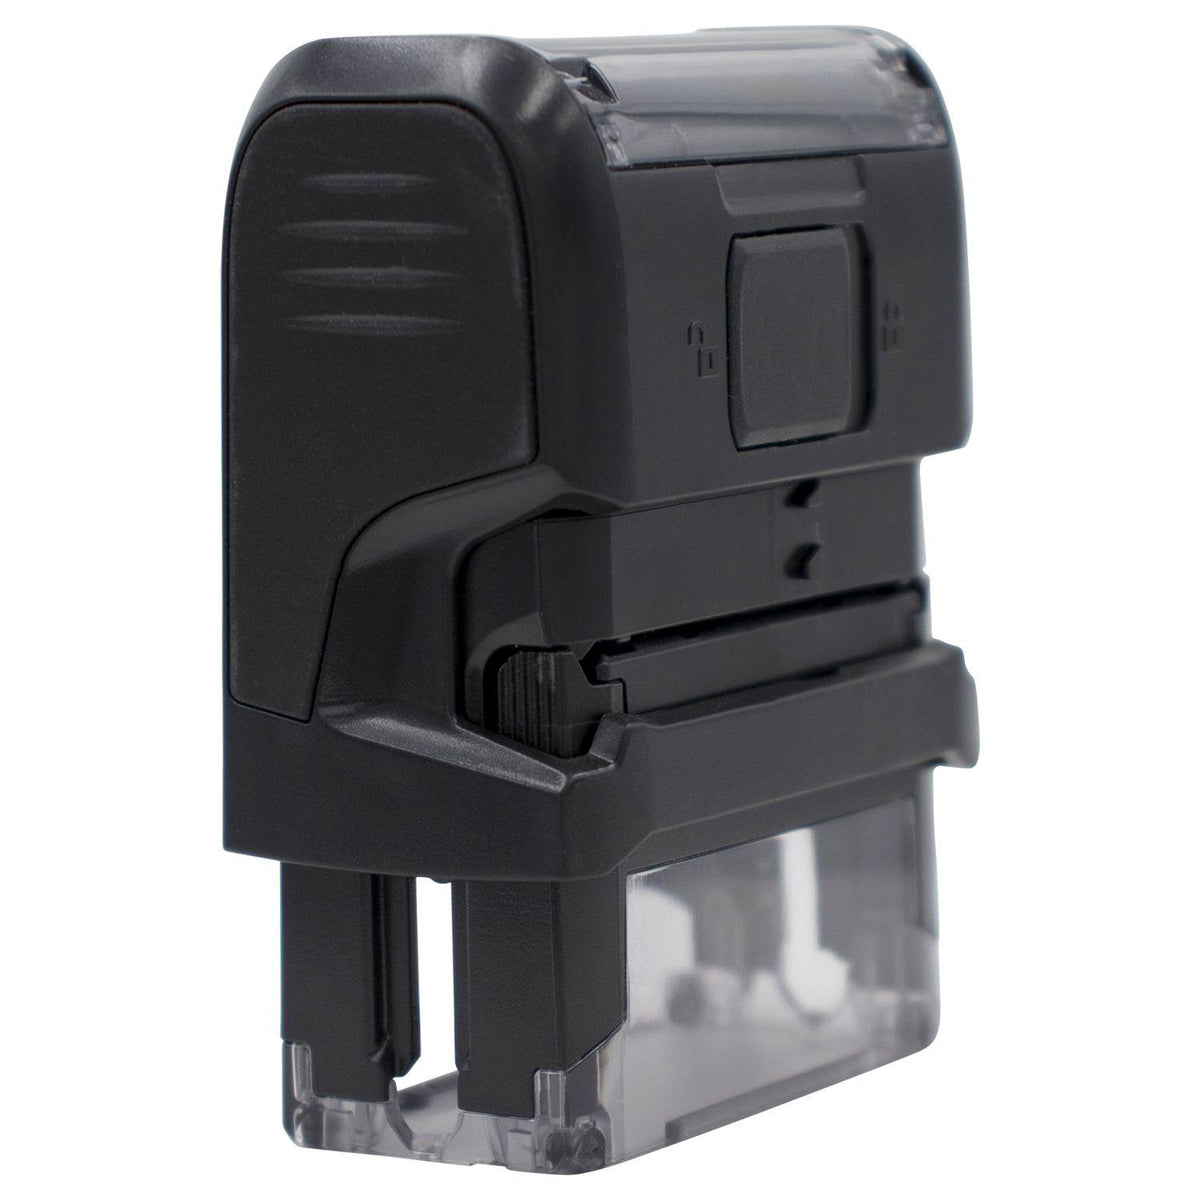 Large Self Inking Posted Stamp - Engineer Seal Stamps - Brand_Trodat, Impression Size_Large, Stamp Type_Self-Inking Stamp, Type of Use_Business, Type of Use_Office